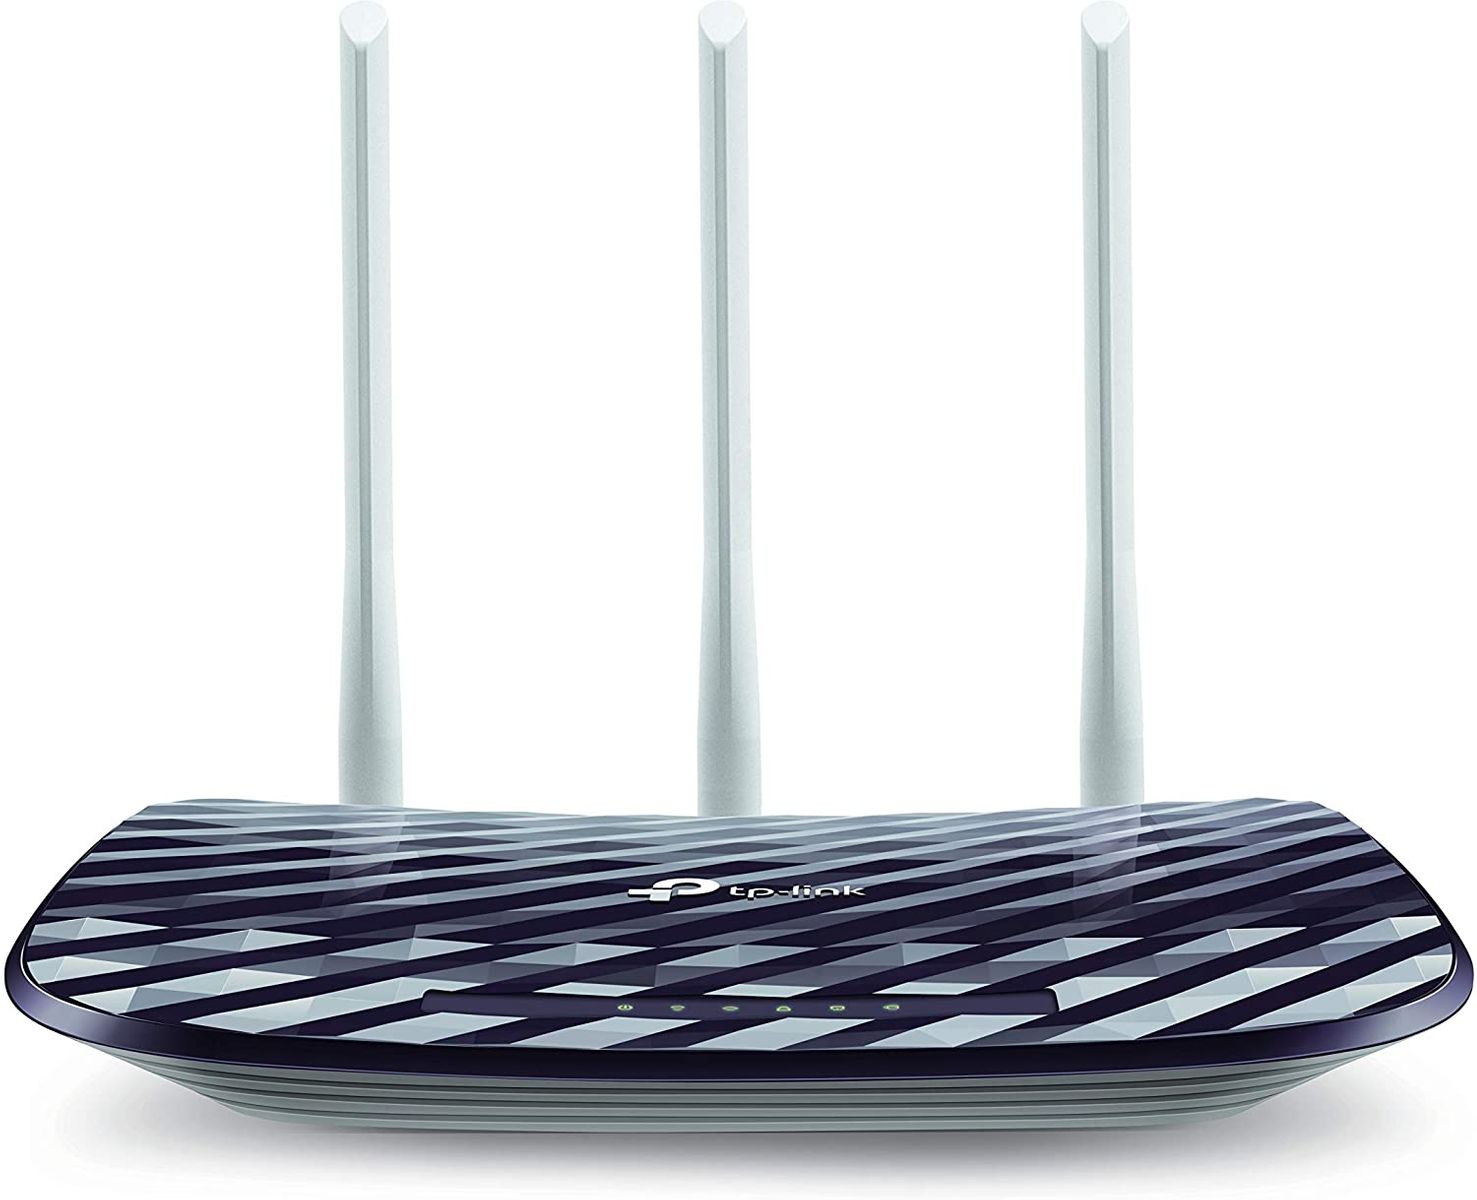 TP-LINK AC750 WLAN Router Fast Ethernet Dual-Band (2.4 GHz/5 GHz)